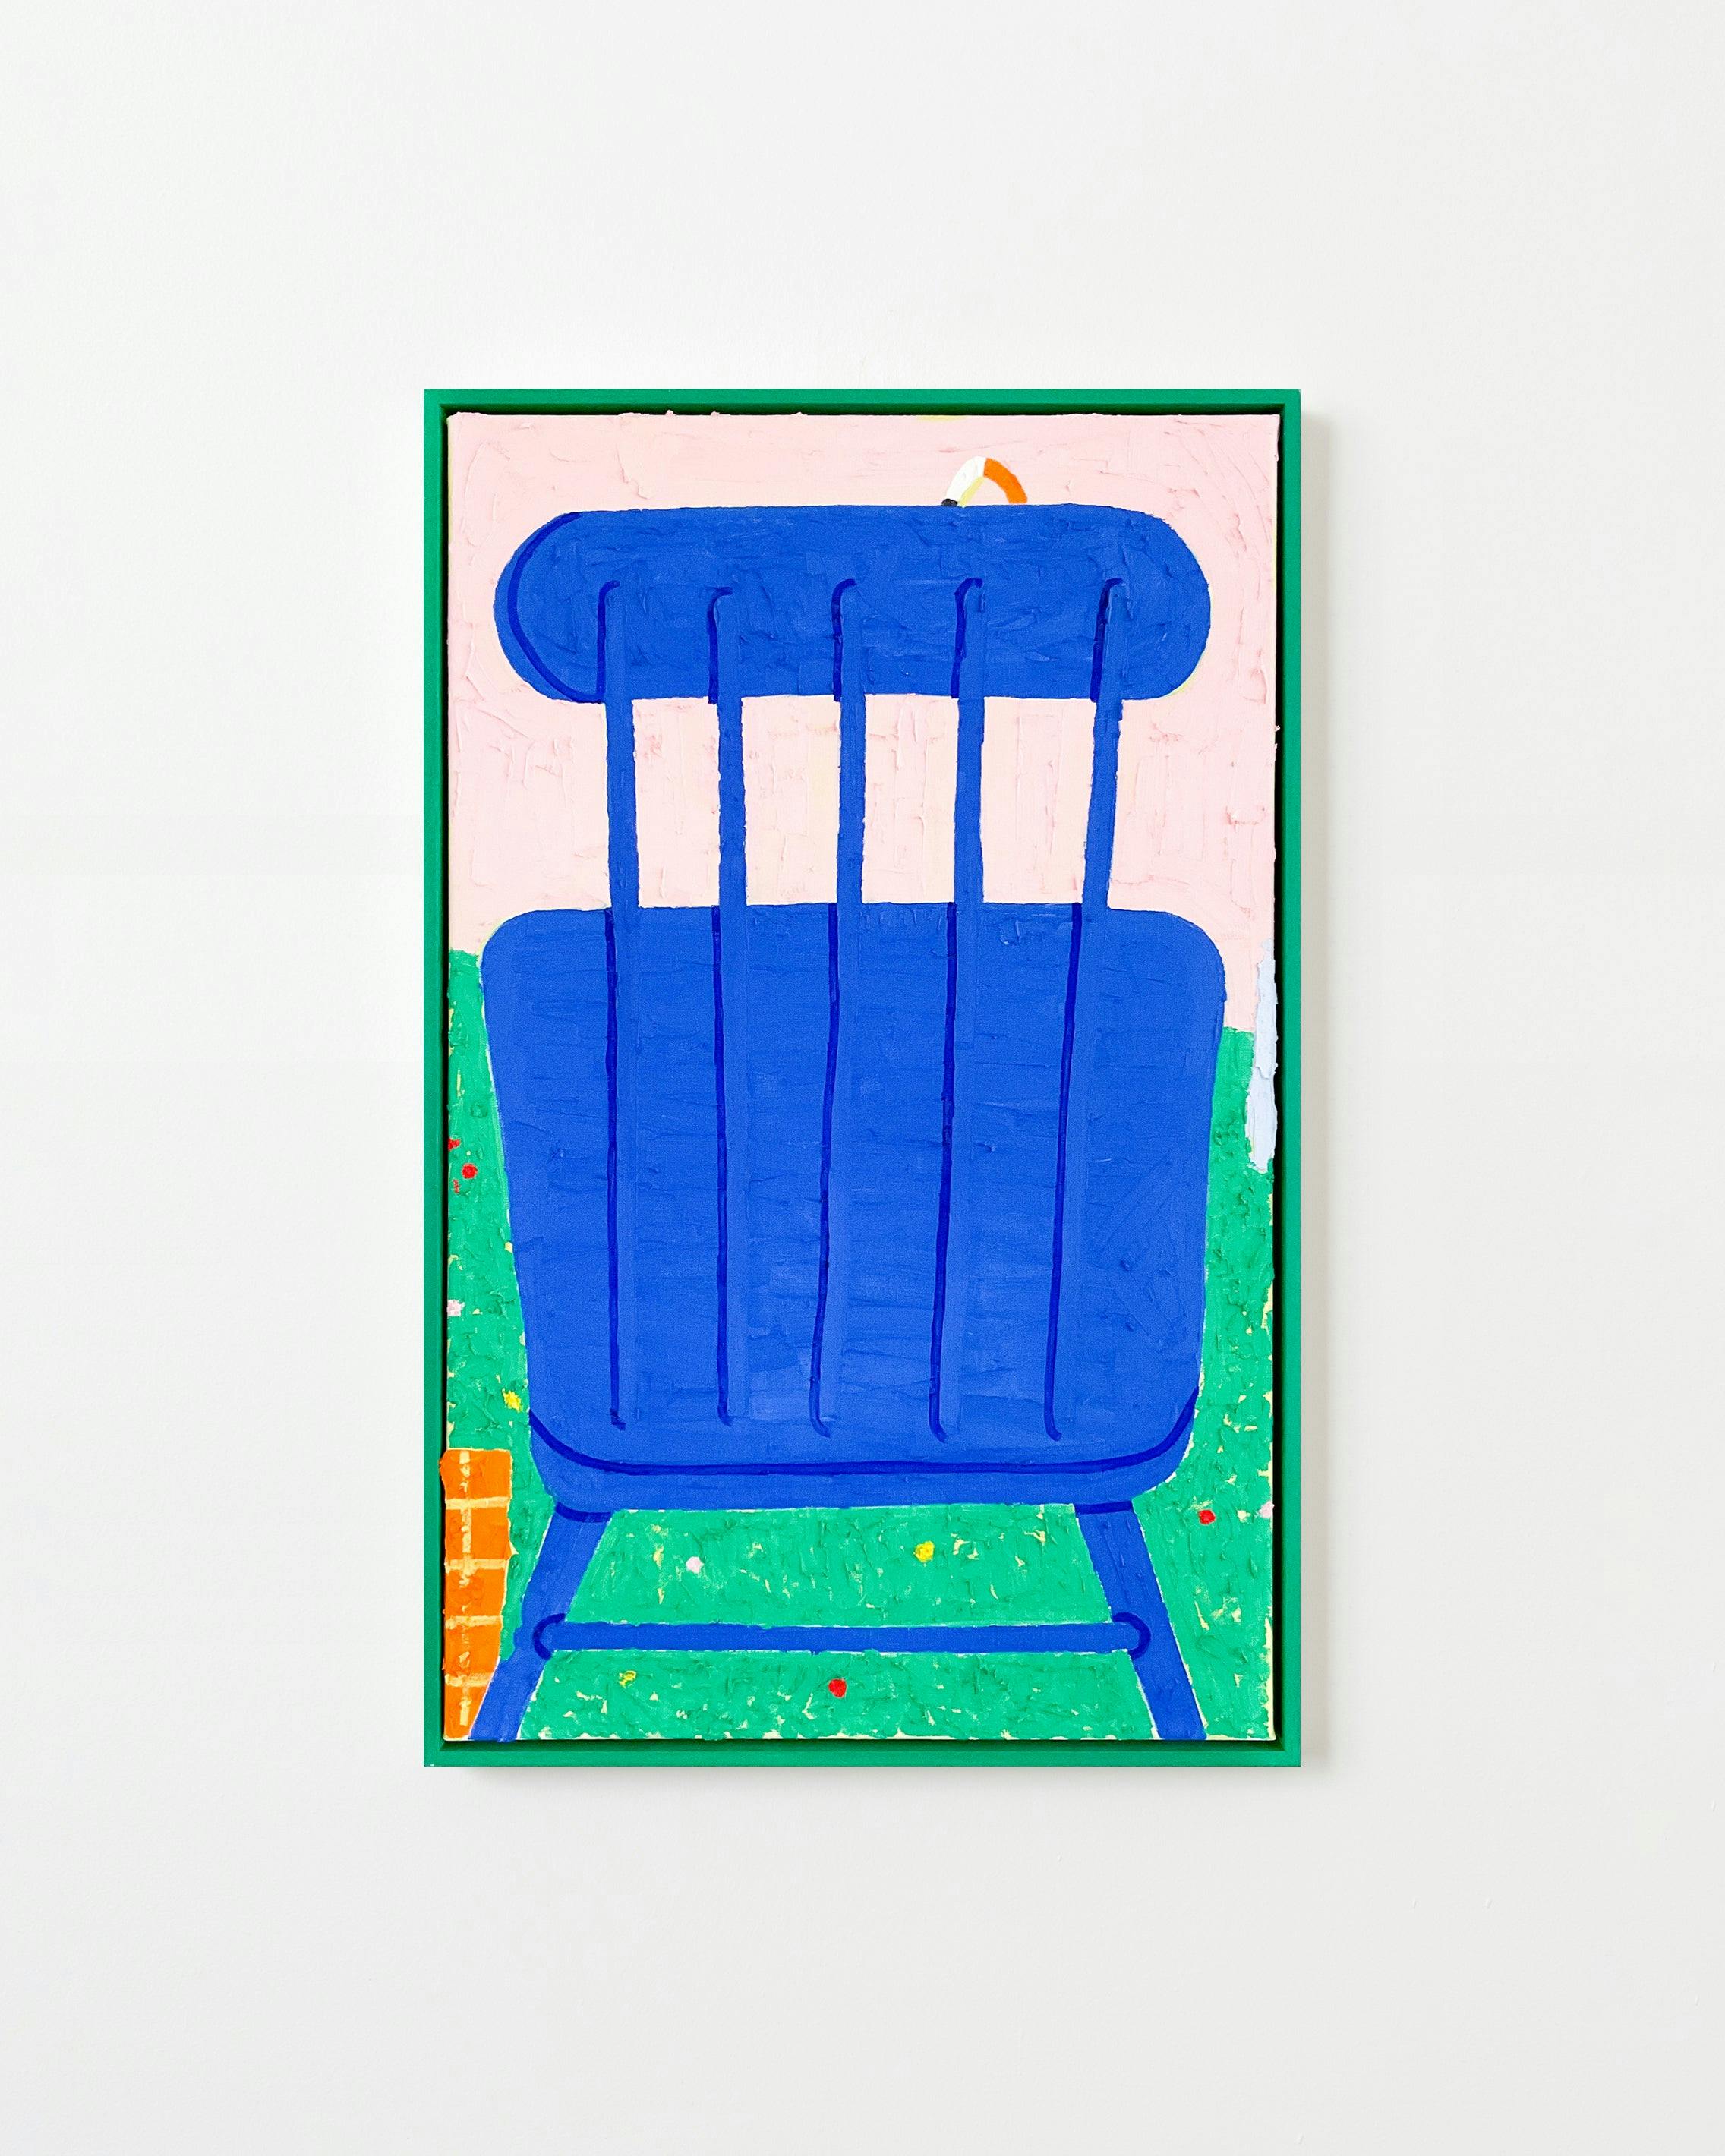 Painting by Frederique Matti titled "The chair has been outside for a while".